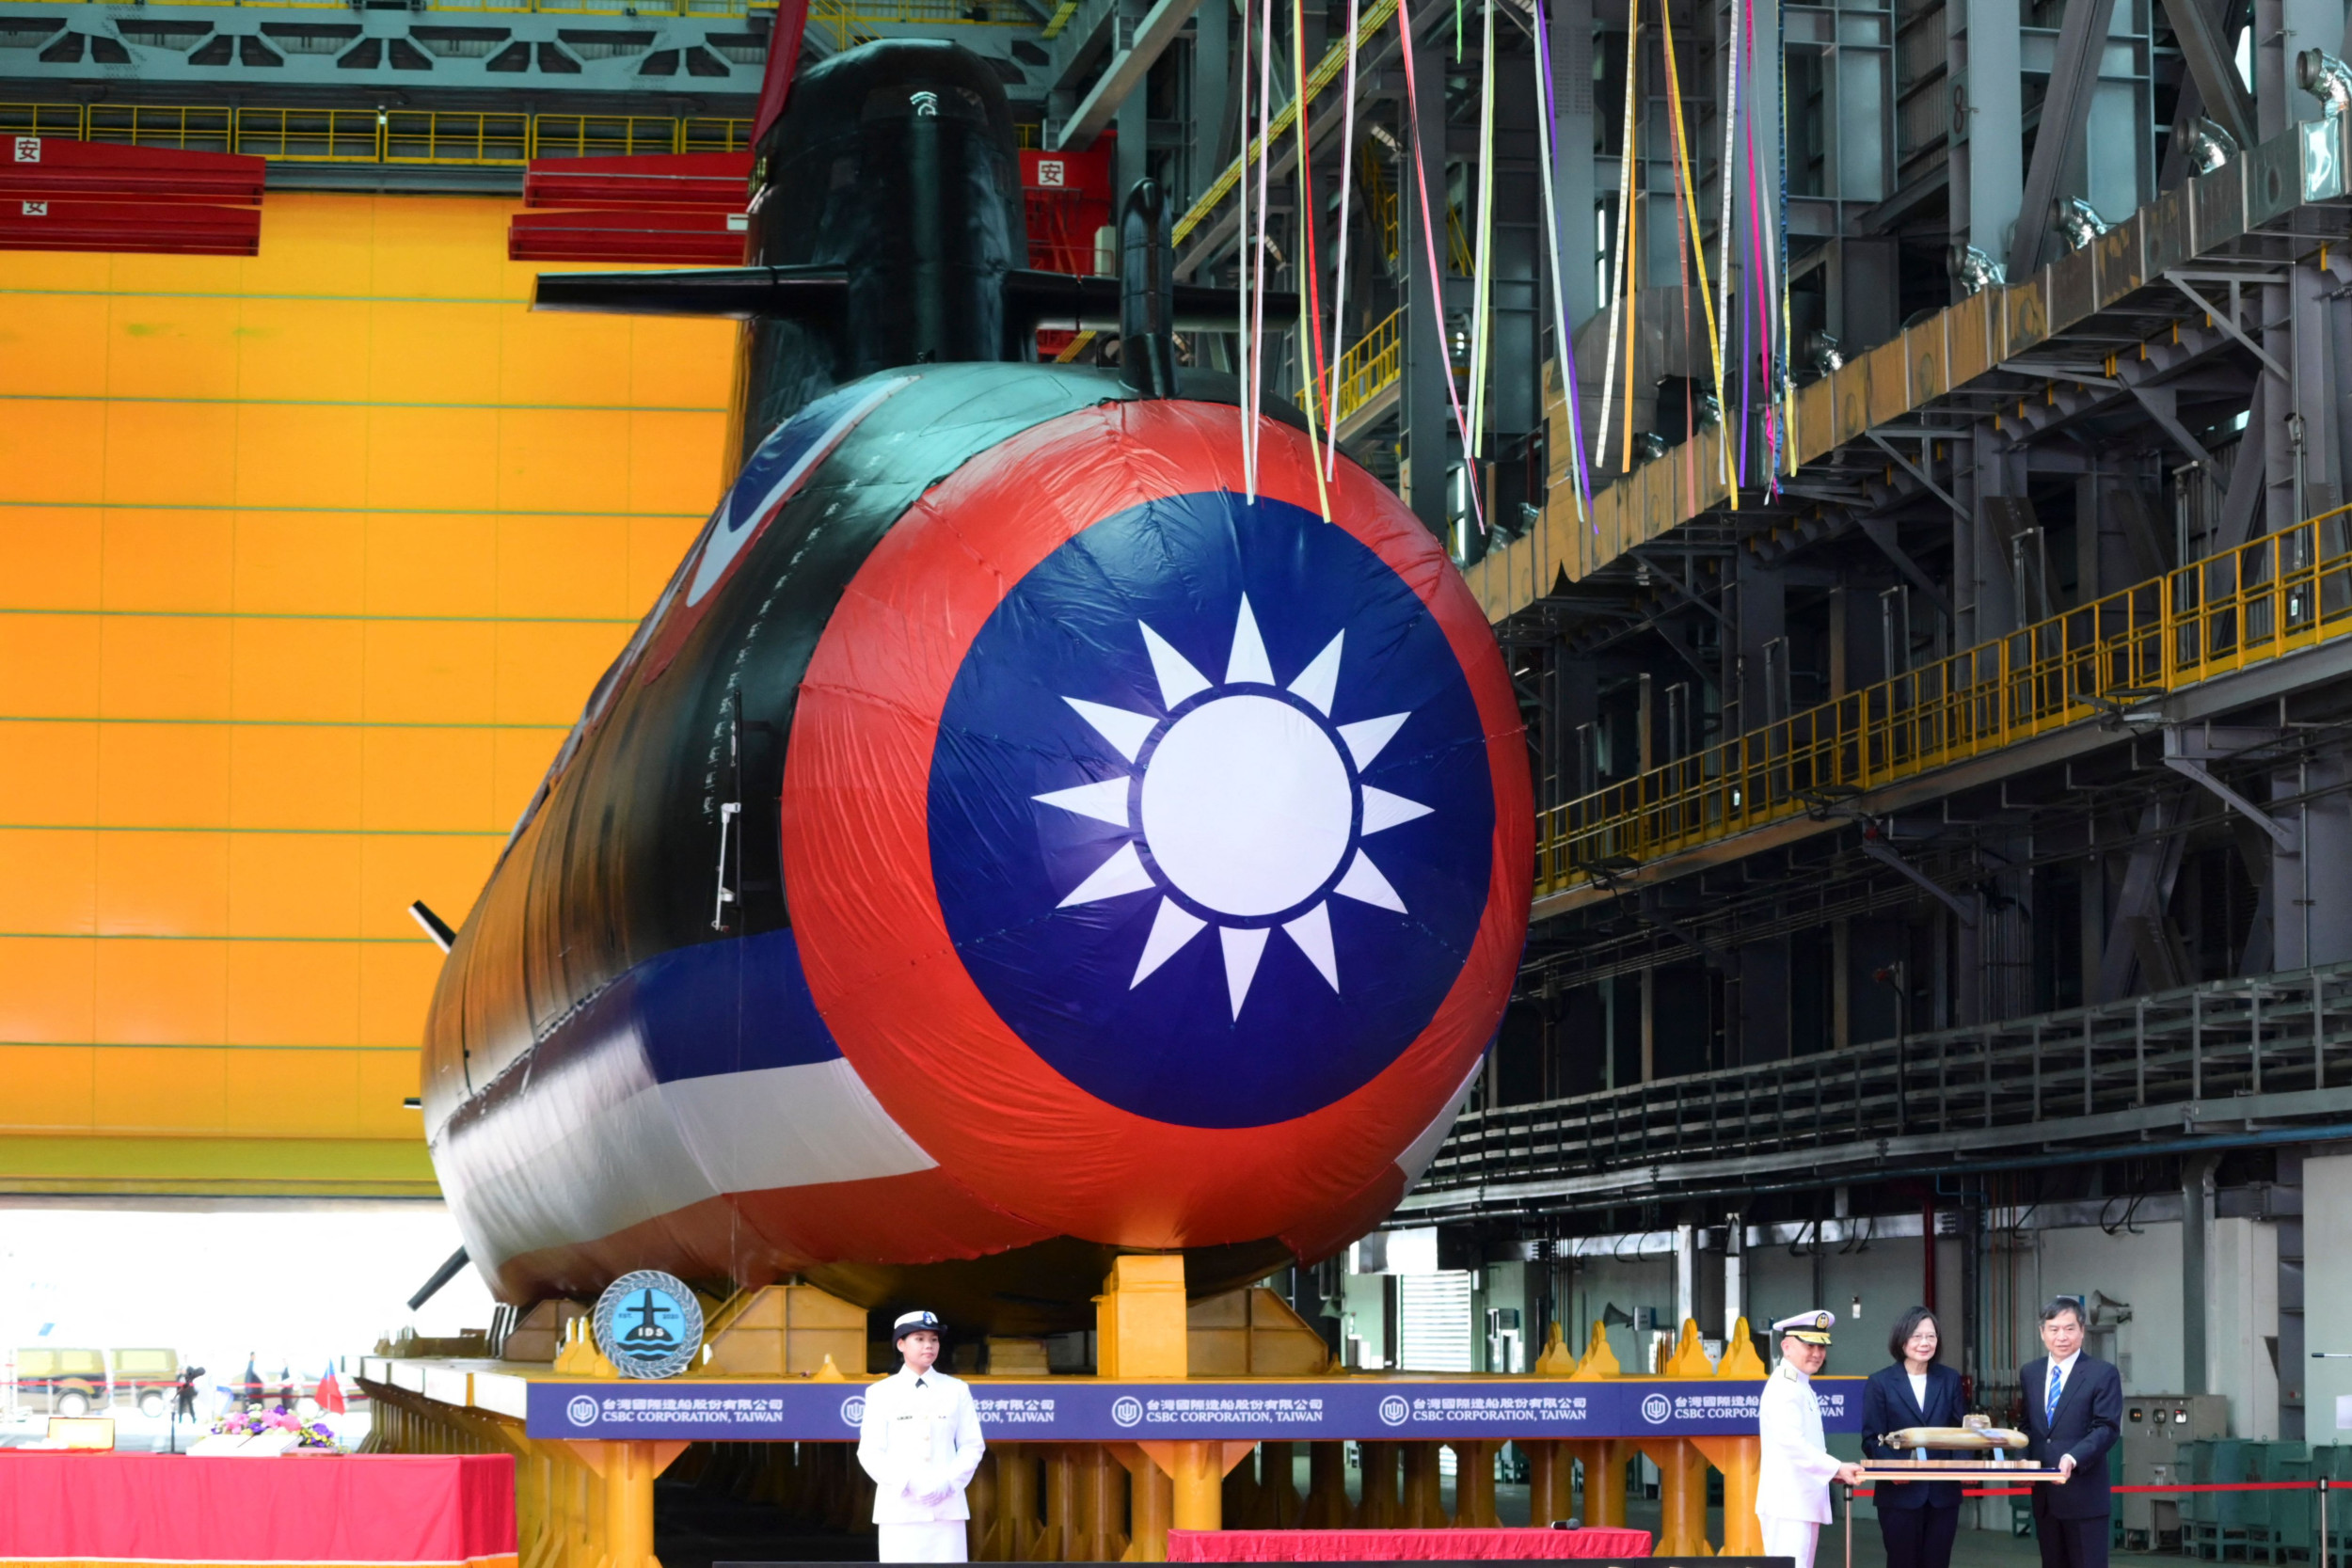 pictures reveal hardware on taiwan's hunter-killer submarine